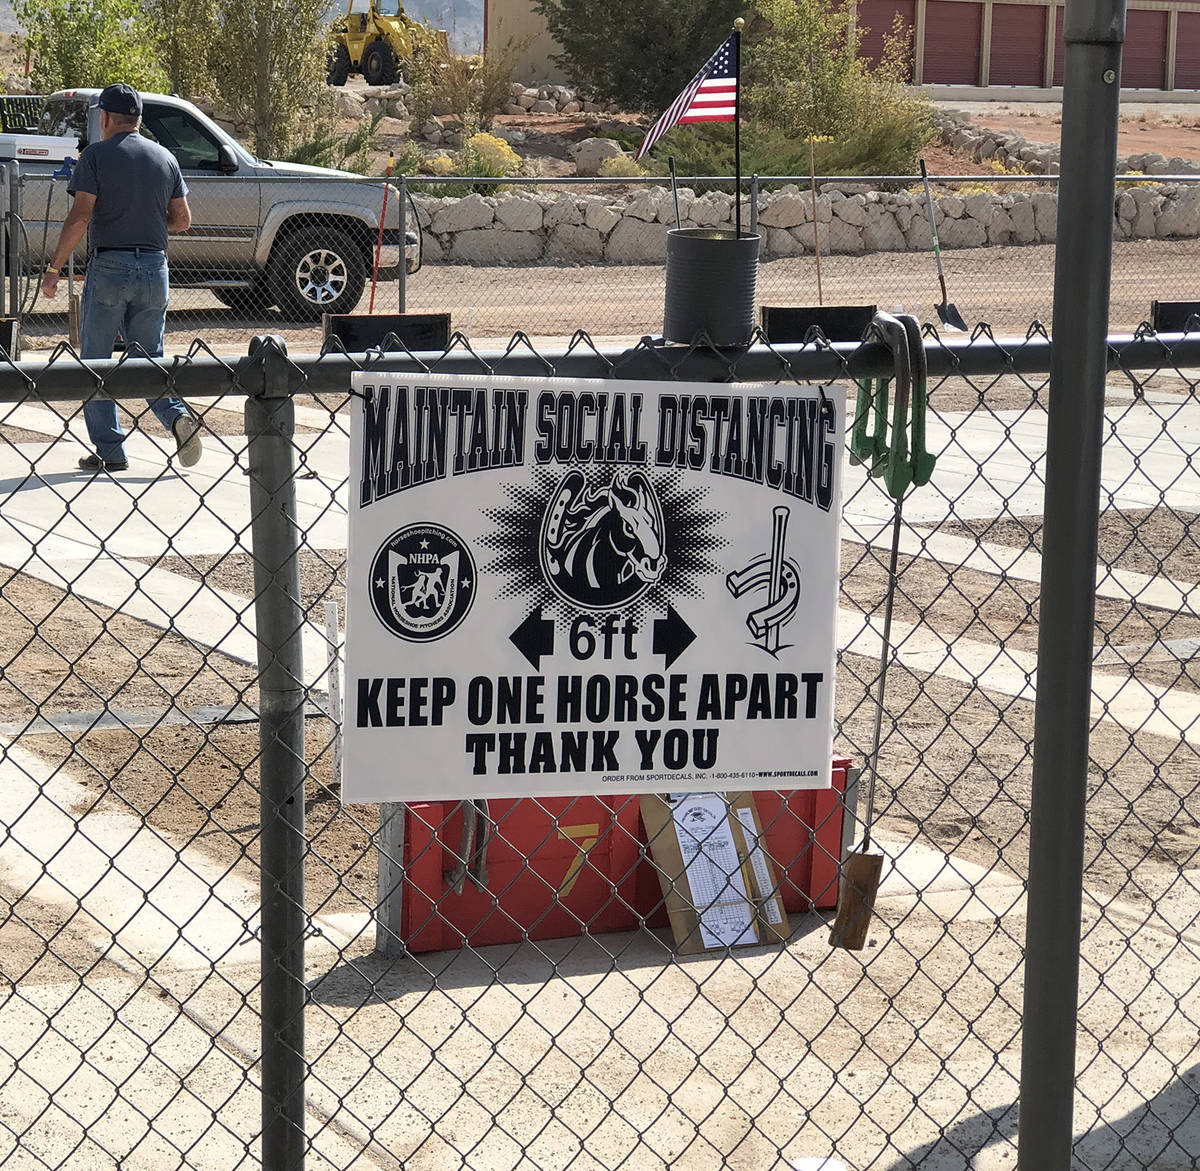 Tom Rysinski/Pahrump Valley Times The Joe Friel Sports Complex reminded people to maintain soci ...